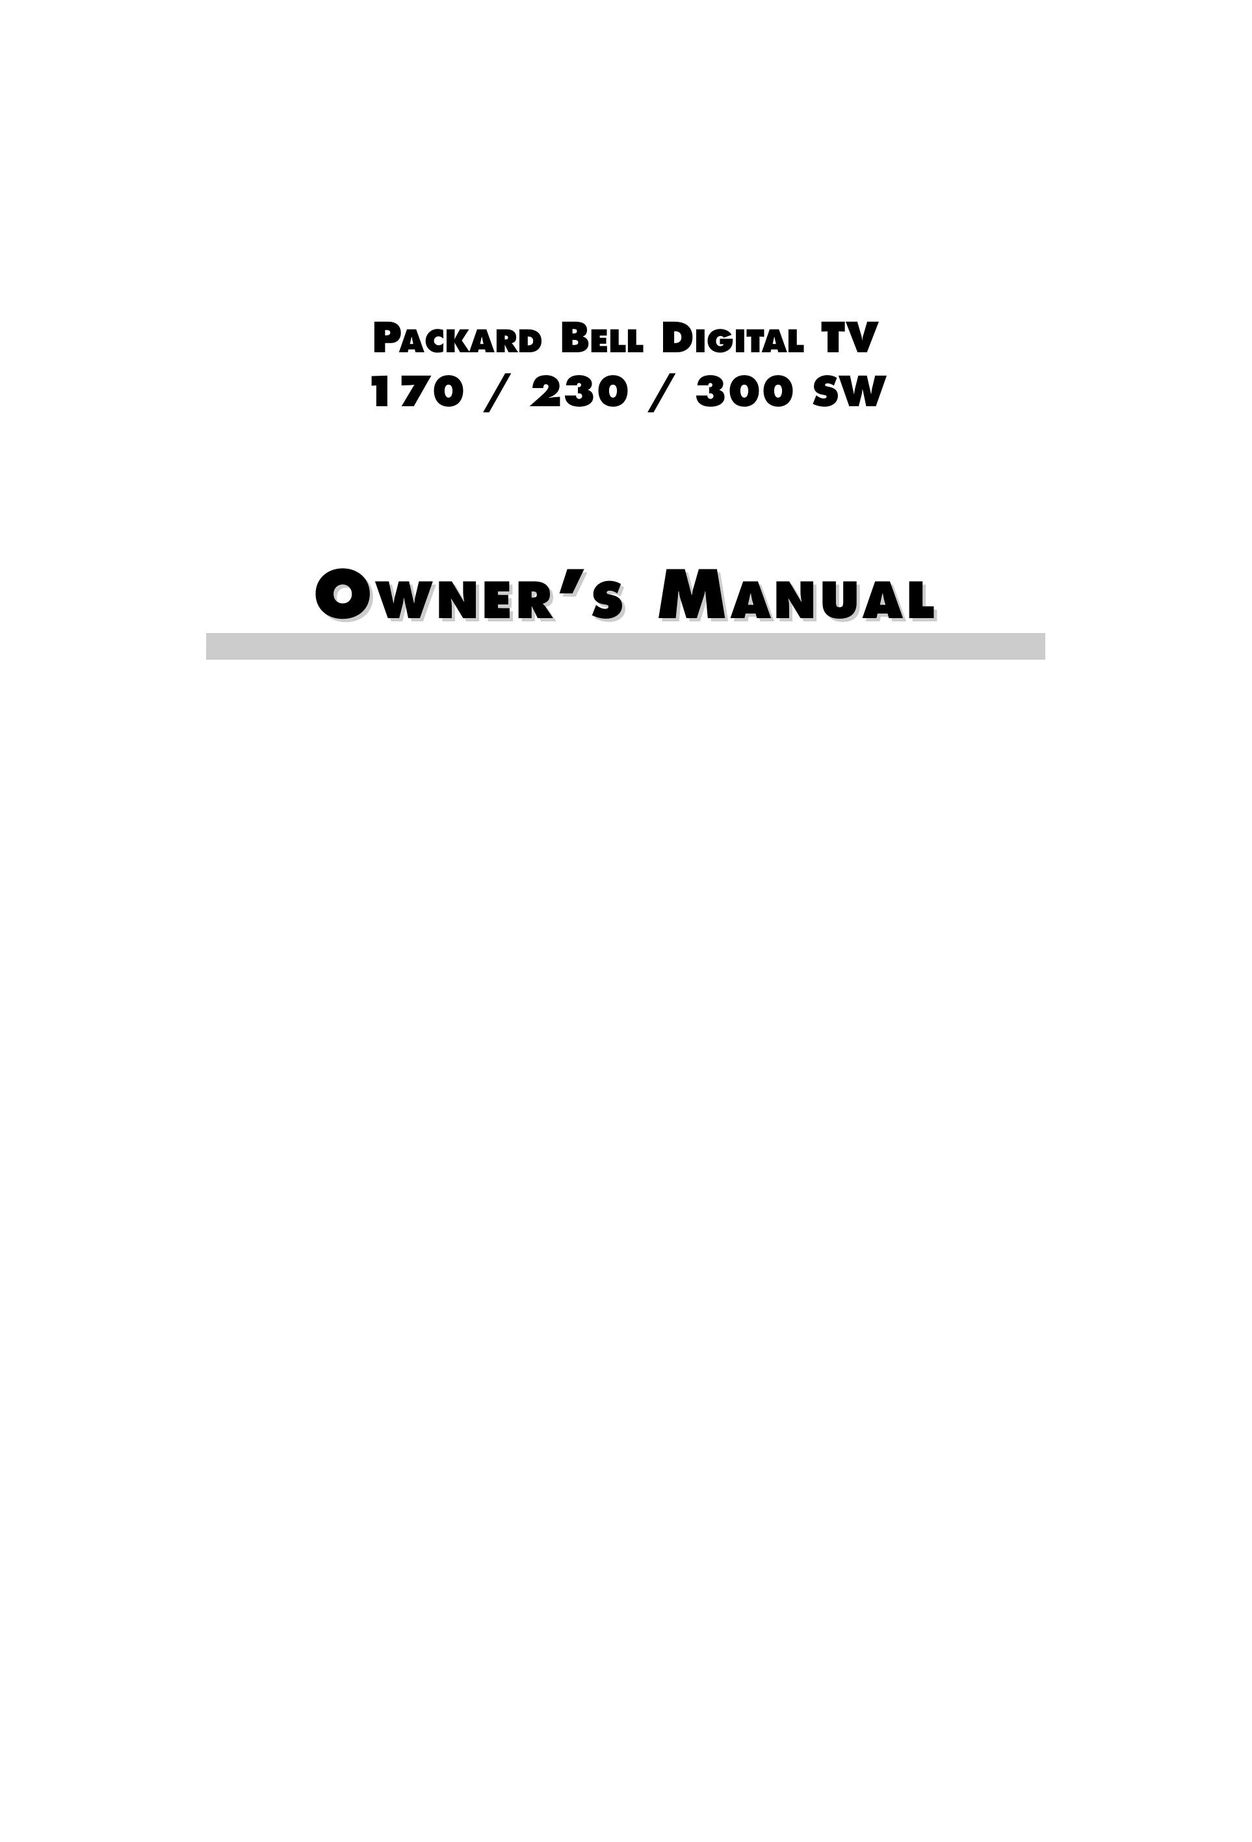 Packard Bell 300 SW Flat Panel Television User Manual